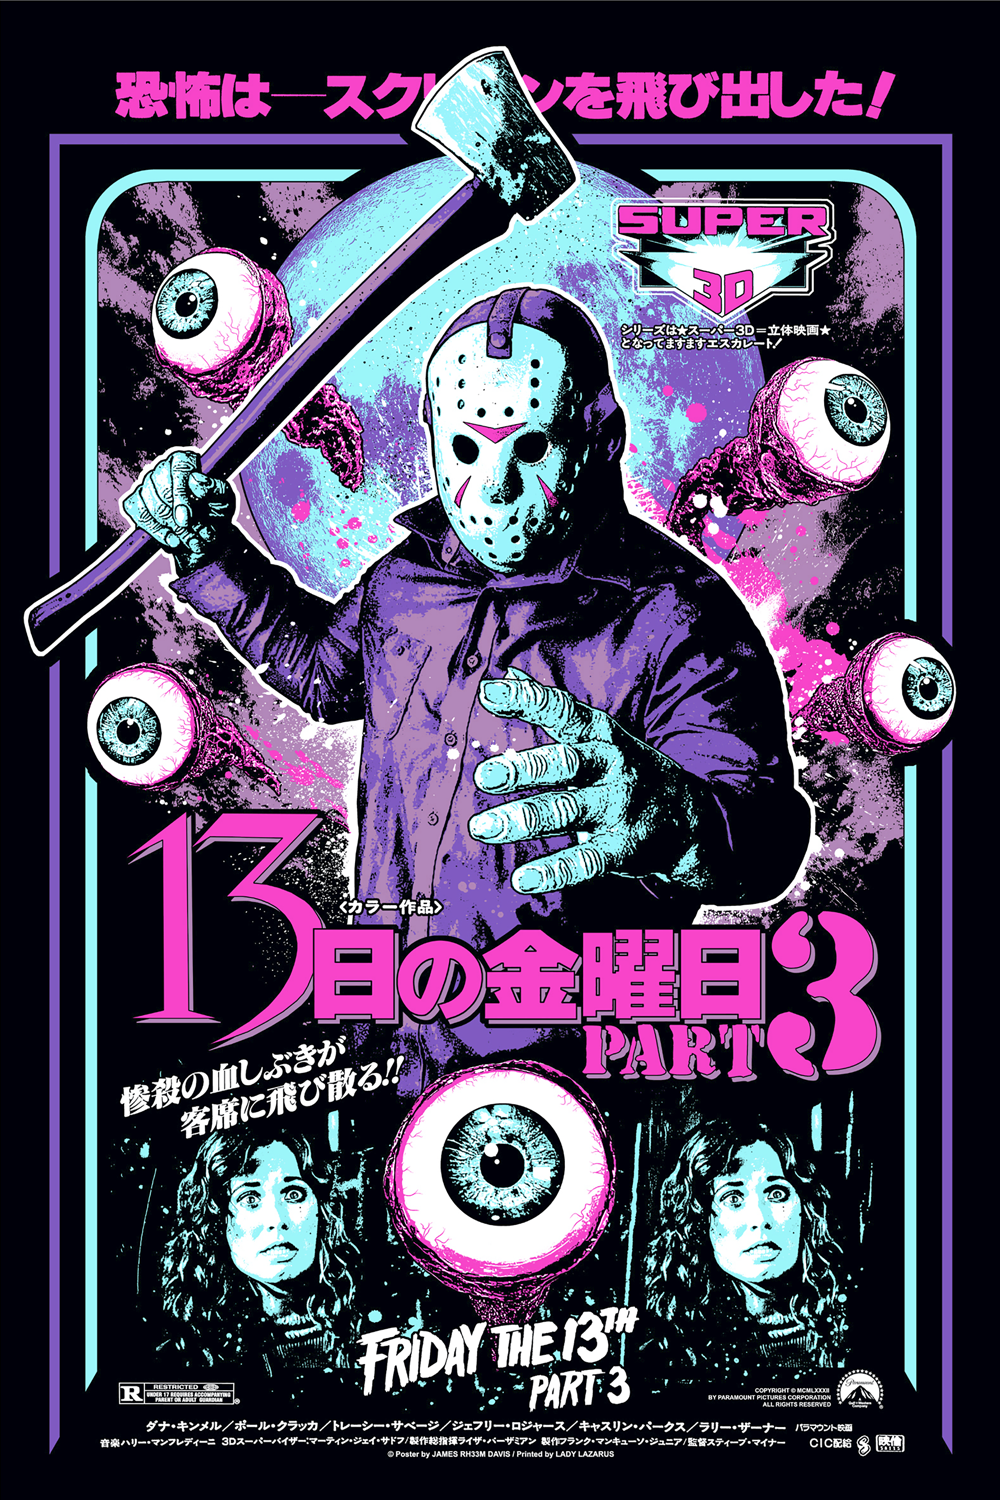 friday the 13th part 3 poster